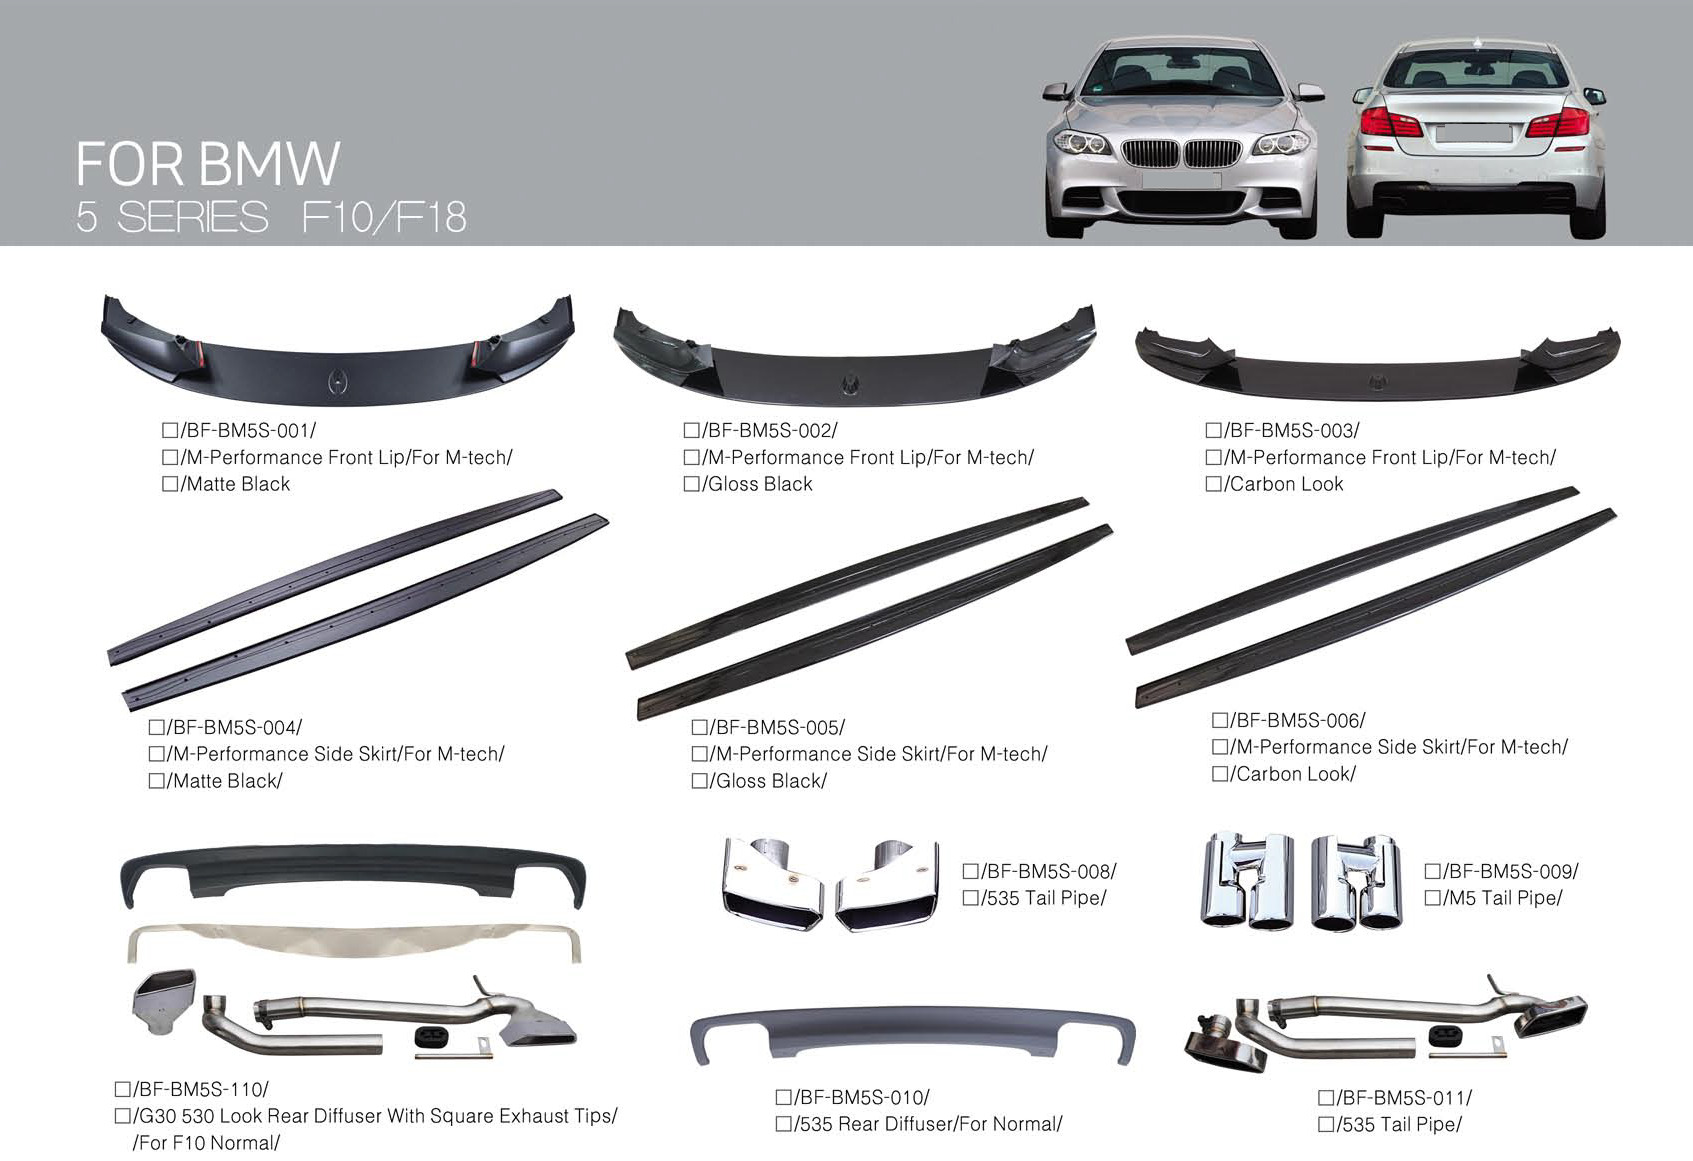 BMW 5 Series F10/F18, Side Skirt, Front Lip, Tail Pipe